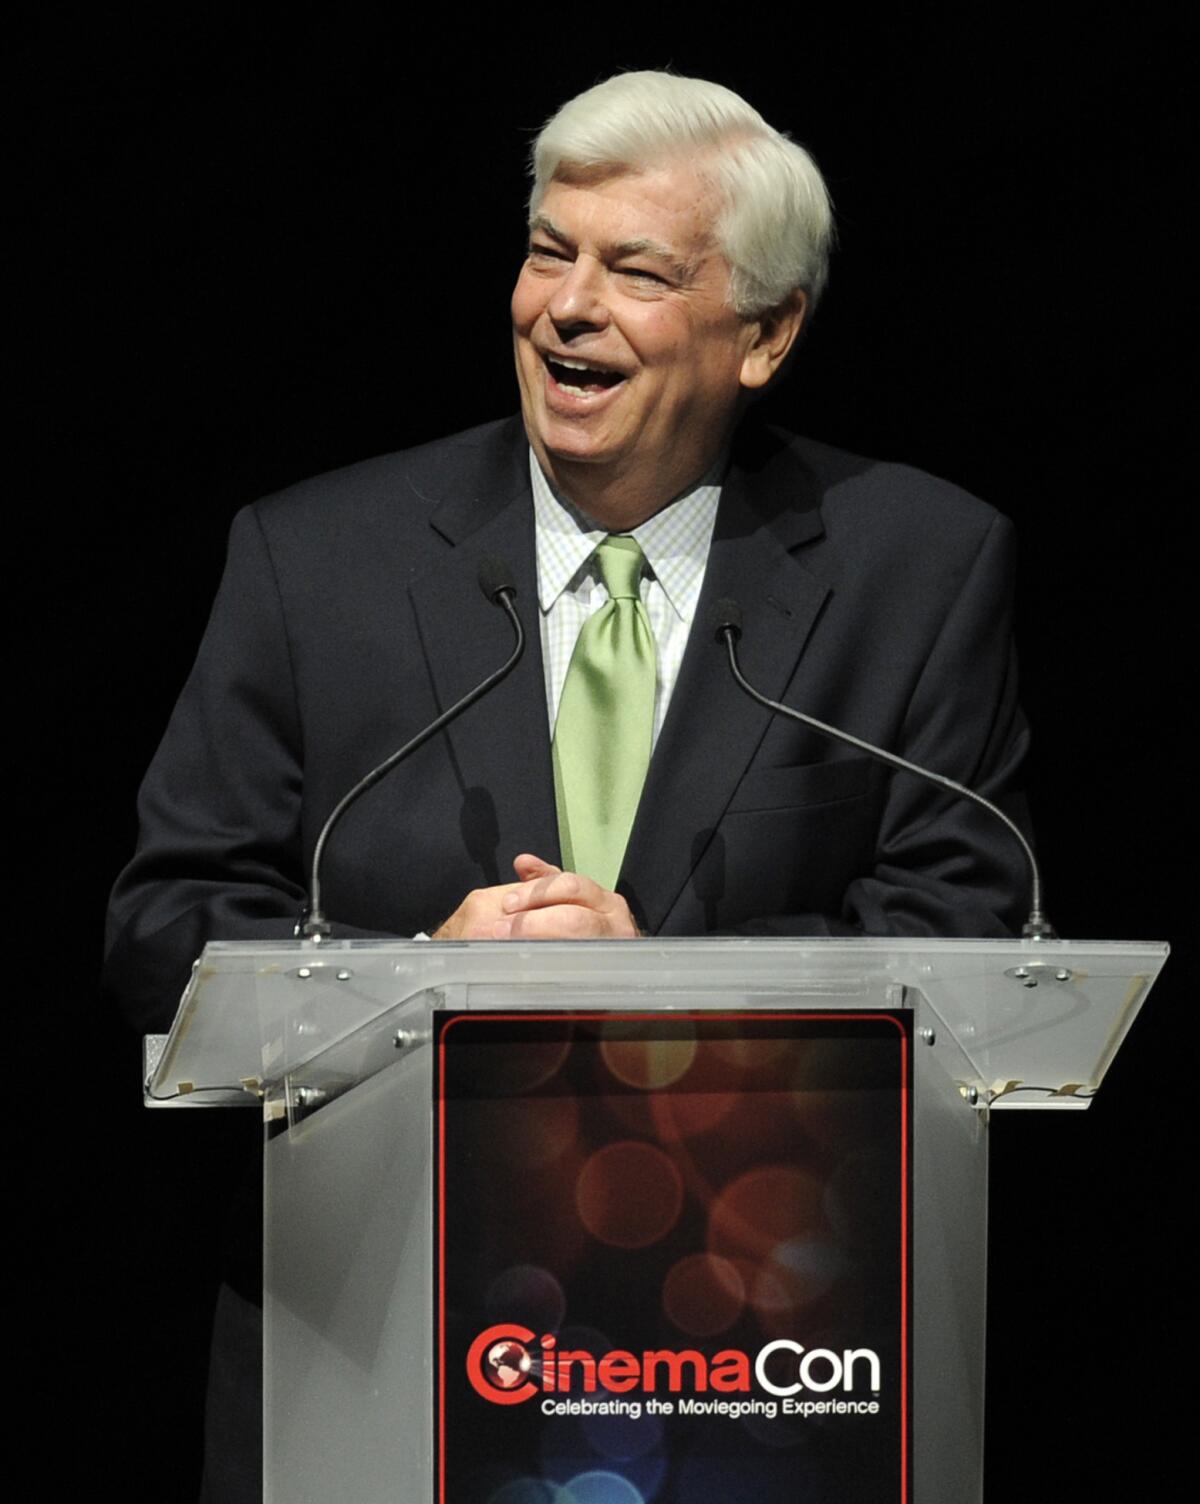 Former U.S. Sen. Chris Dodd and current chairman and CEO of the Motion Picture Assn. of America addresses the crowd at CinemaCon 2011 in Las Vegas.